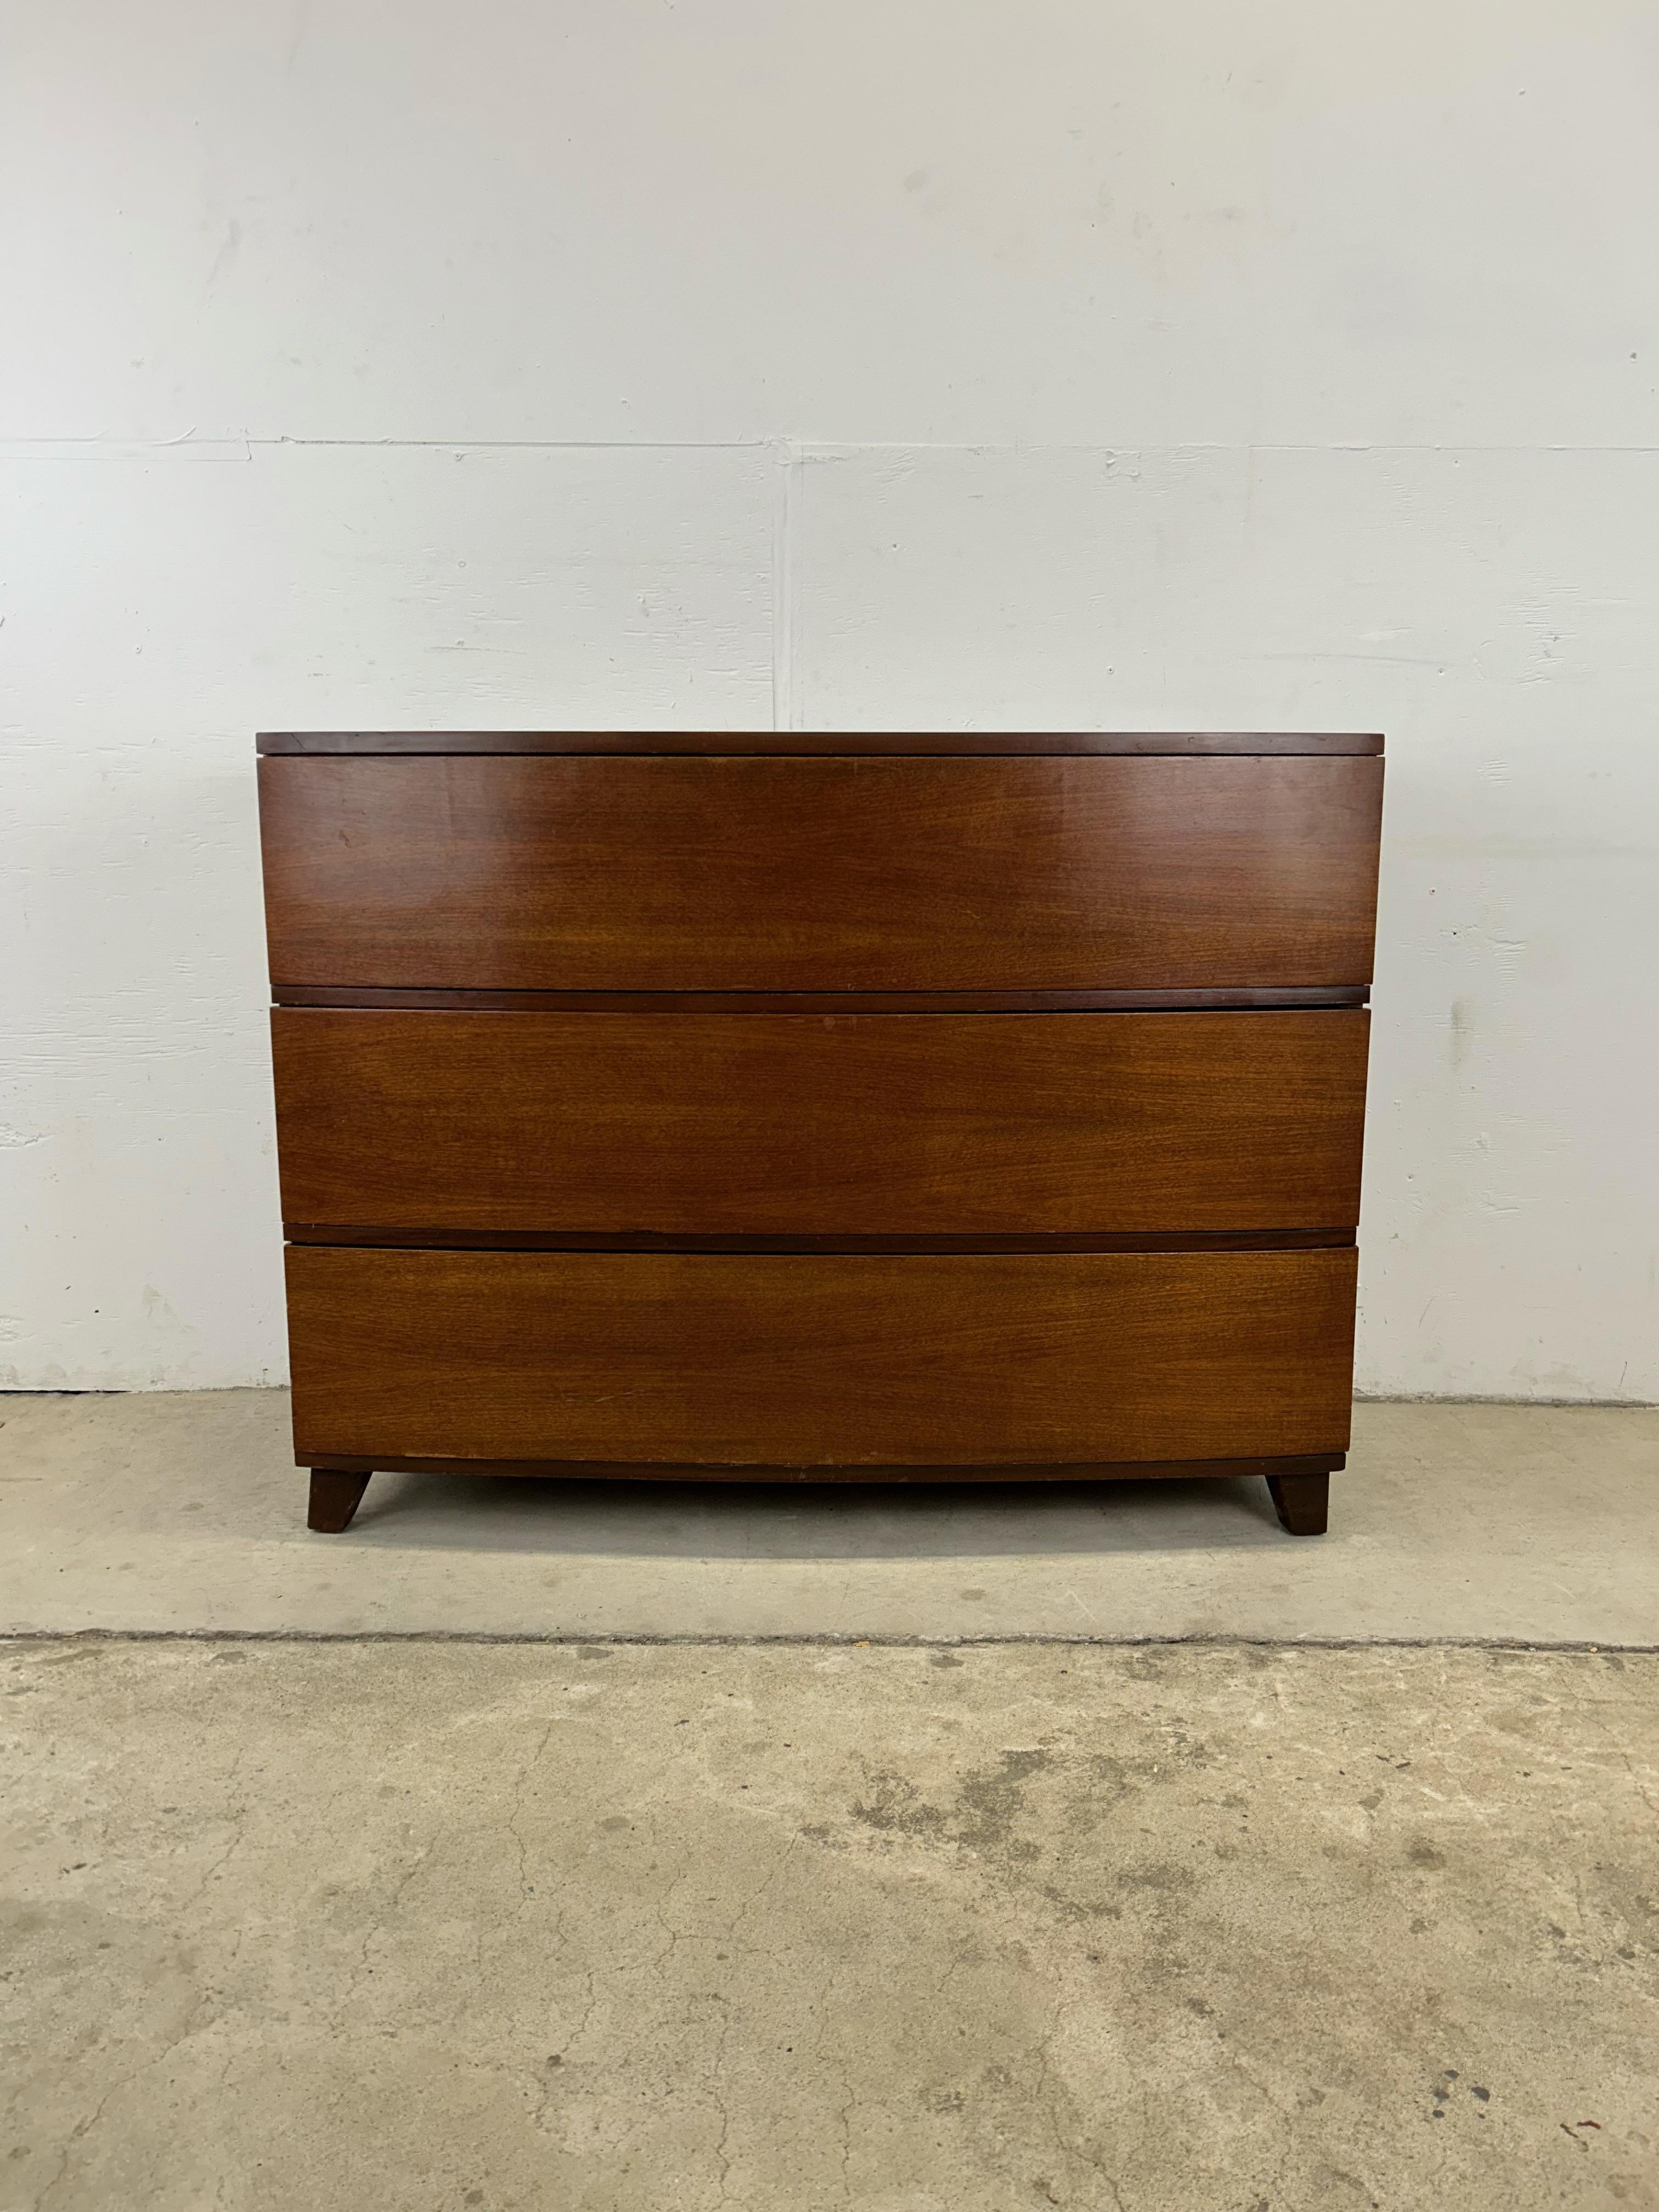 This vintage chest of drawers by TriBond Furniture features hardwood construction, original walnut veneer, three dovetailed drawers, and small tapered legs. 

Matching nightstands and cedar lined wardrobe available separately. 

Dimensions: 44w